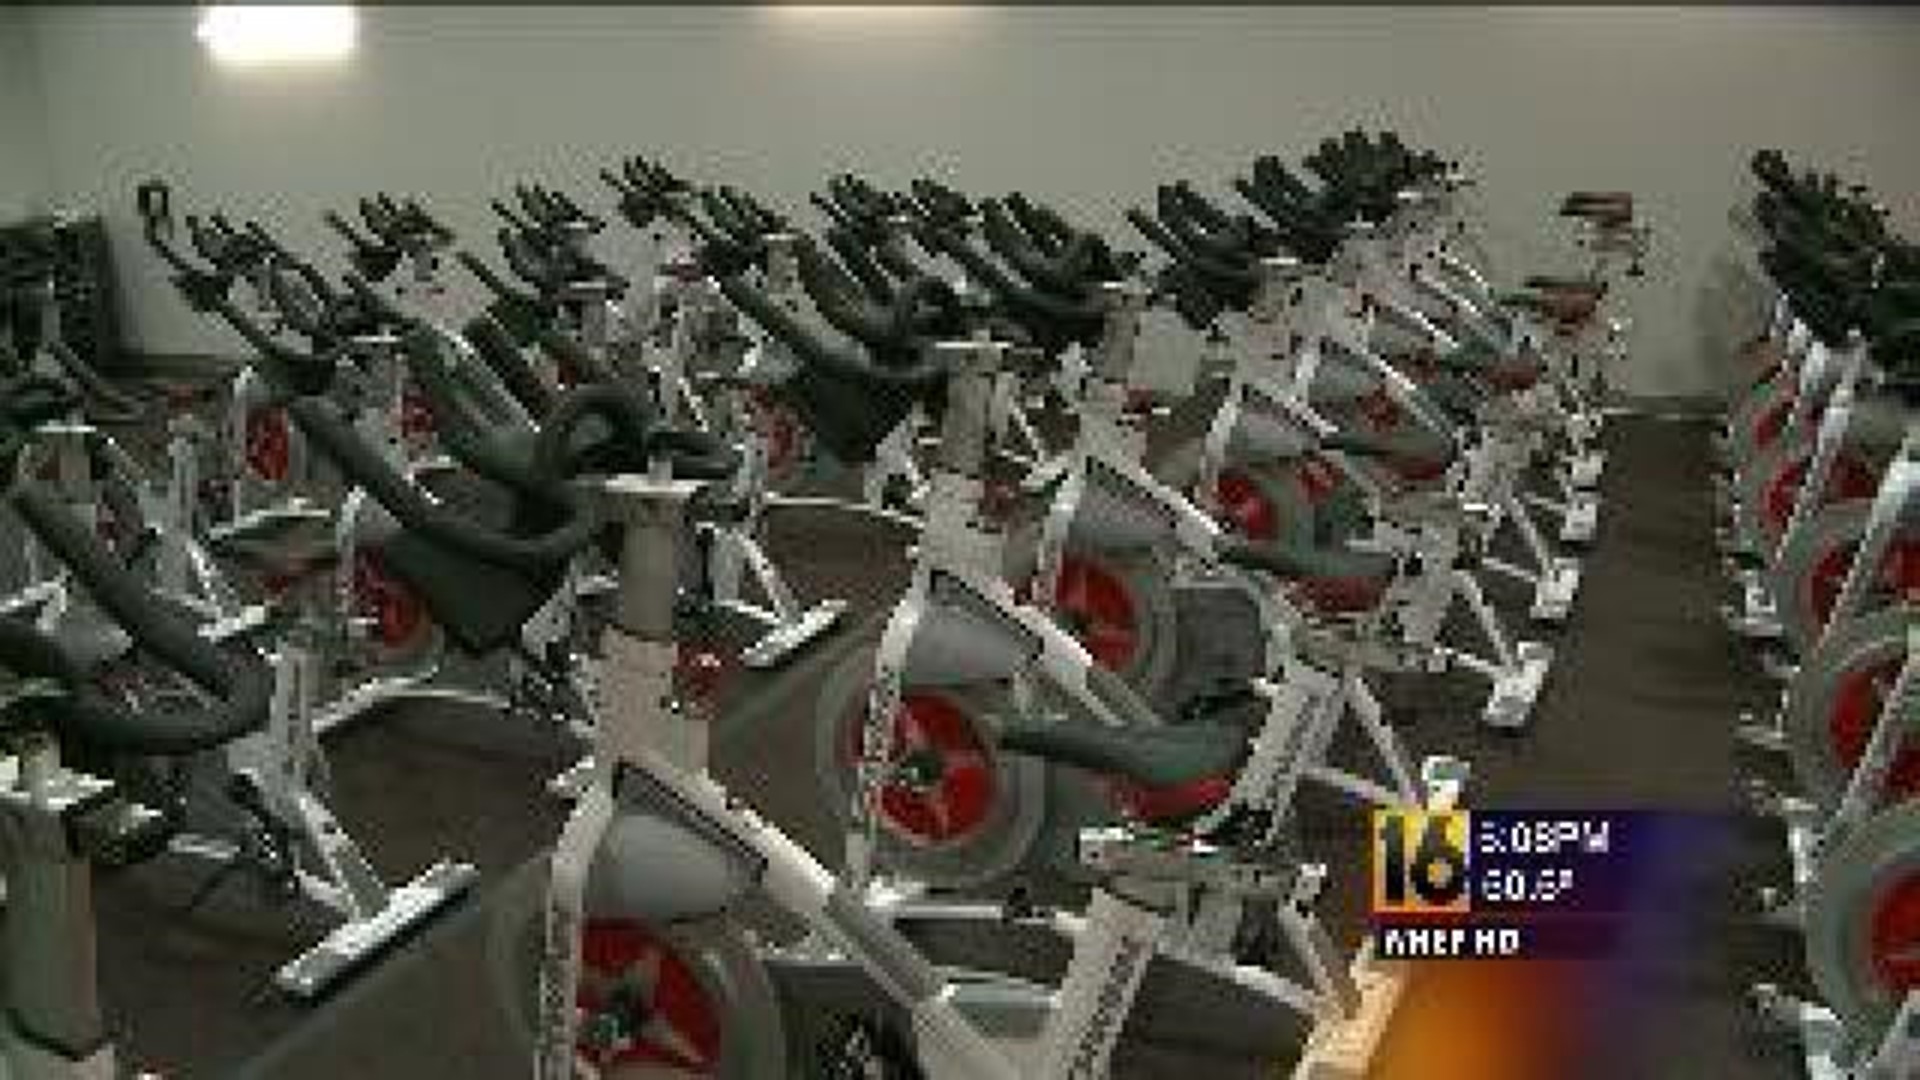 New Gym In Kingston Offers State-Of-The-Art Work Out